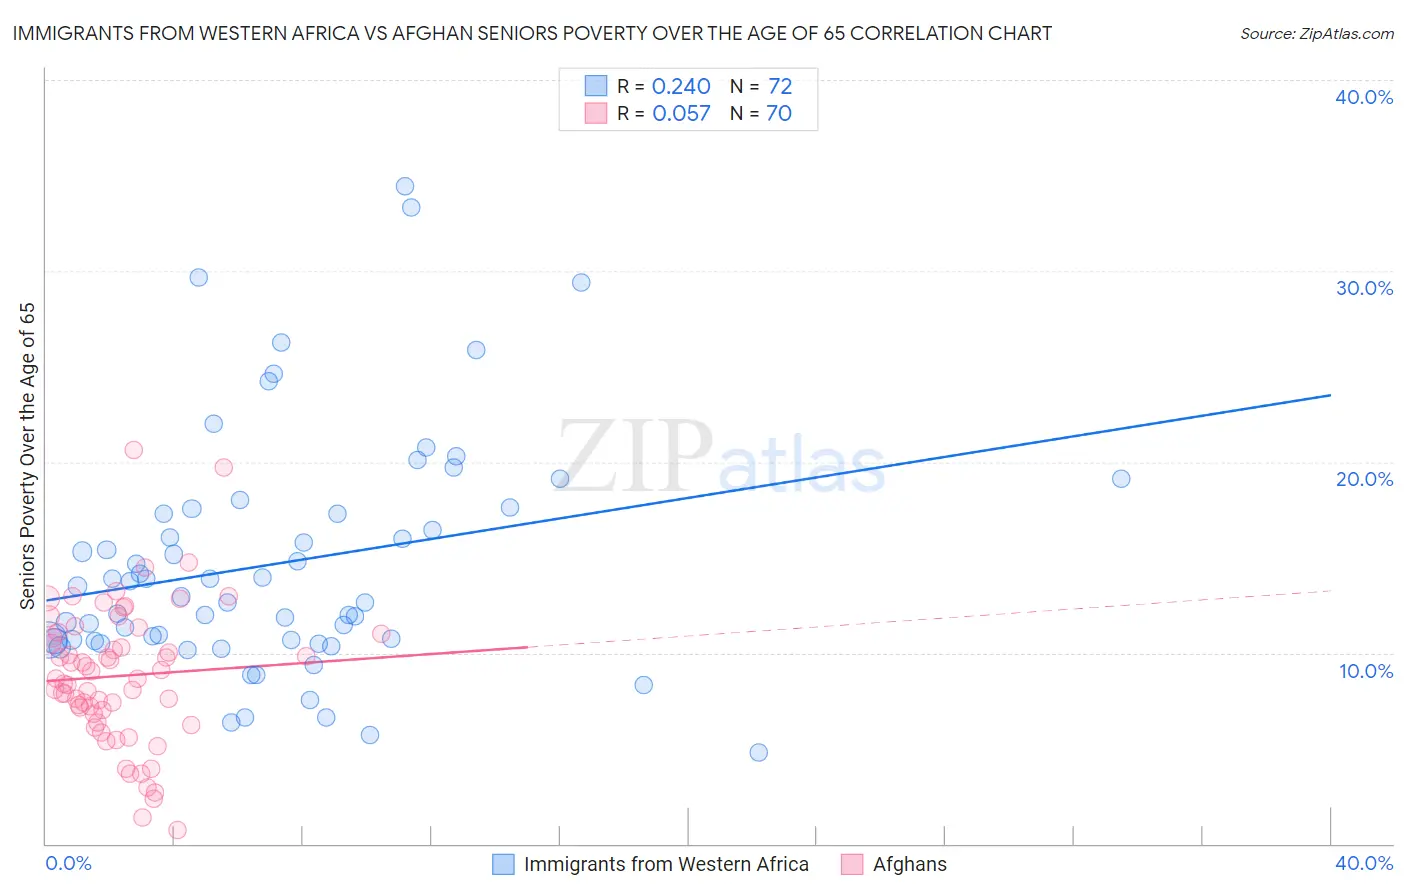 Immigrants from Western Africa vs Afghan Seniors Poverty Over the Age of 65